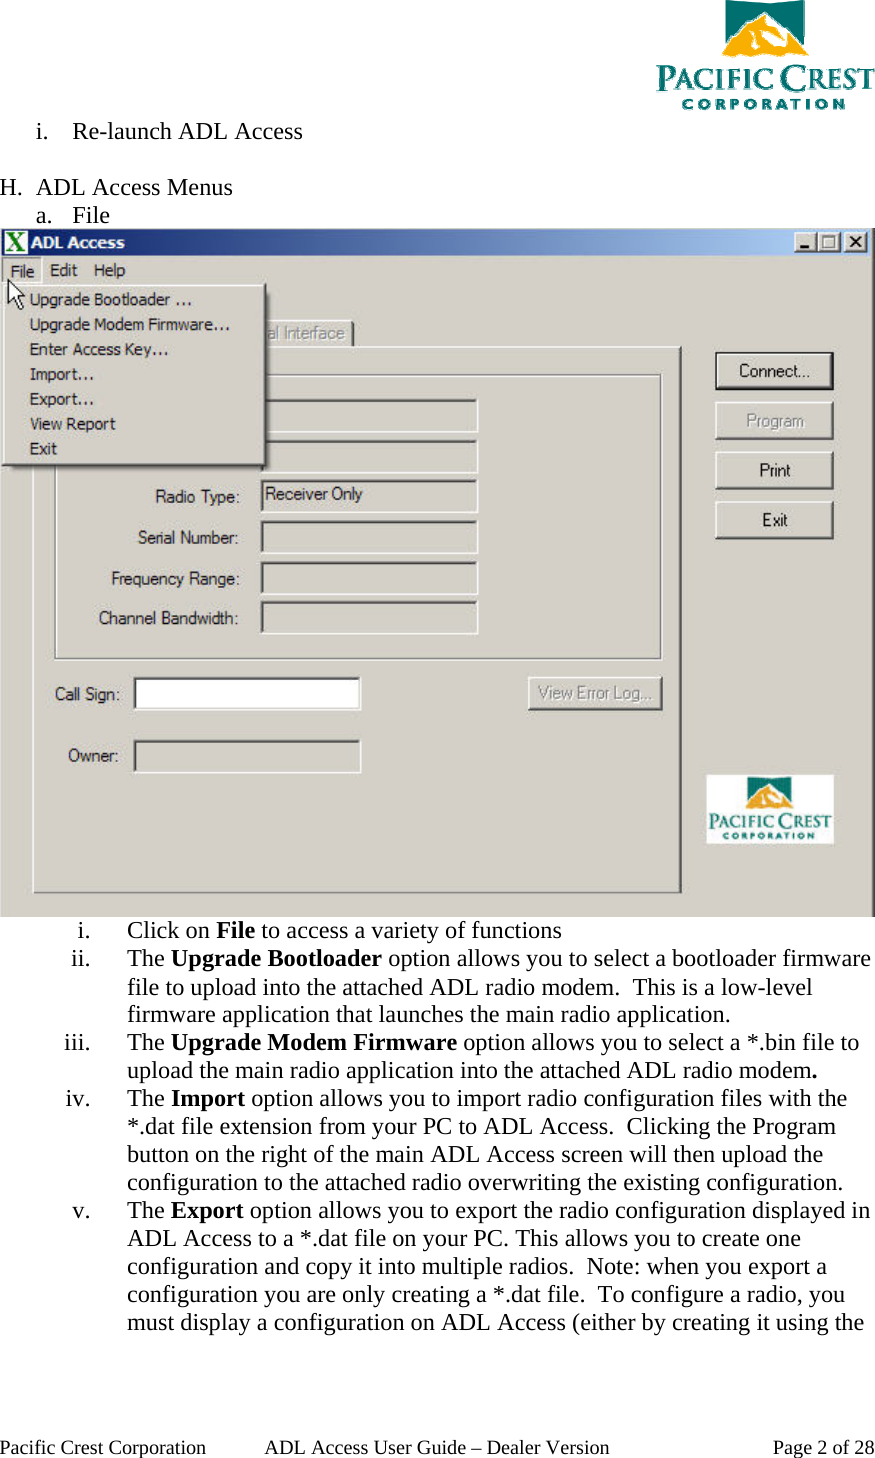  Pacific Crest Corporation  ADL Access User Guide – Dealer Version  Page 2 of 28 i. Re-launch ADL Access  H. ADL Access Menus a. File  i. Click on File to access a variety of functions ii. The Upgrade Bootloader option allows you to select a bootloader firmware file to upload into the attached ADL radio modem.  This is a low-level firmware application that launches the main radio application. iii. The Upgrade Modem Firmware option allows you to select a *.bin file to upload the main radio application into the attached ADL radio modem. iv. The Import option allows you to import radio configuration files with the *.dat file extension from your PC to ADL Access.  Clicking the Program button on the right of the main ADL Access screen will then upload the configuration to the attached radio overwriting the existing configuration. v. The Export option allows you to export the radio configuration displayed in ADL Access to a *.dat file on your PC. This allows you to create one configuration and copy it into multiple radios.  Note: when you export a configuration you are only creating a *.dat file.  To configure a radio, you must display a configuration on ADL Access (either by creating it using the 